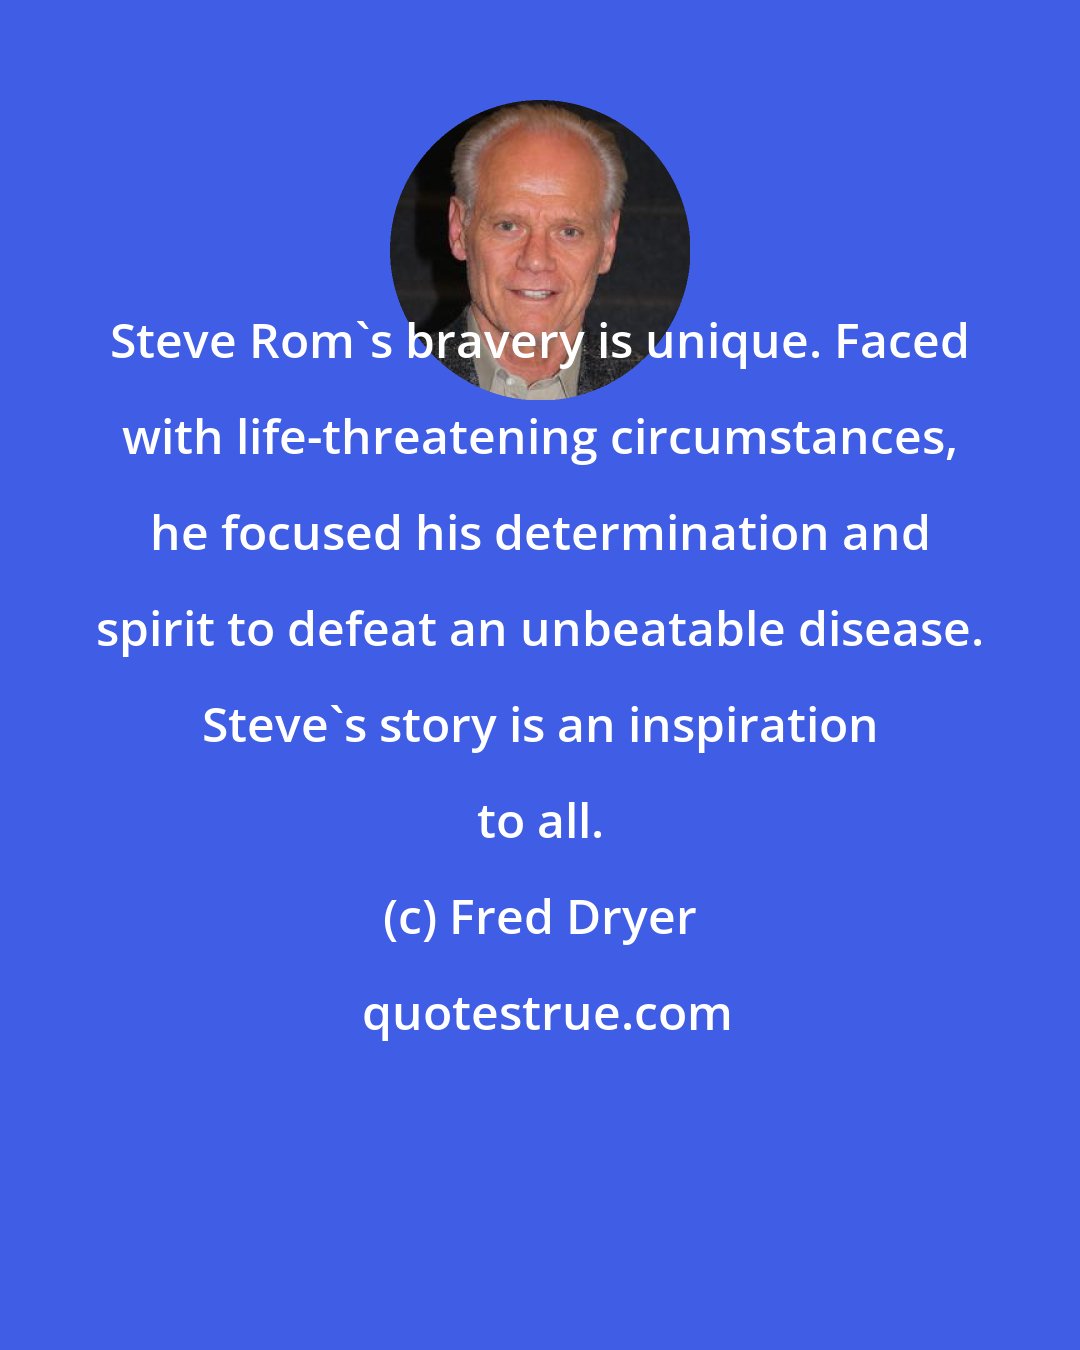 Fred Dryer: Steve Rom's bravery is unique. Faced with life-threatening circumstances, he focused his determination and spirit to defeat an unbeatable disease. Steve's story is an inspiration to all.